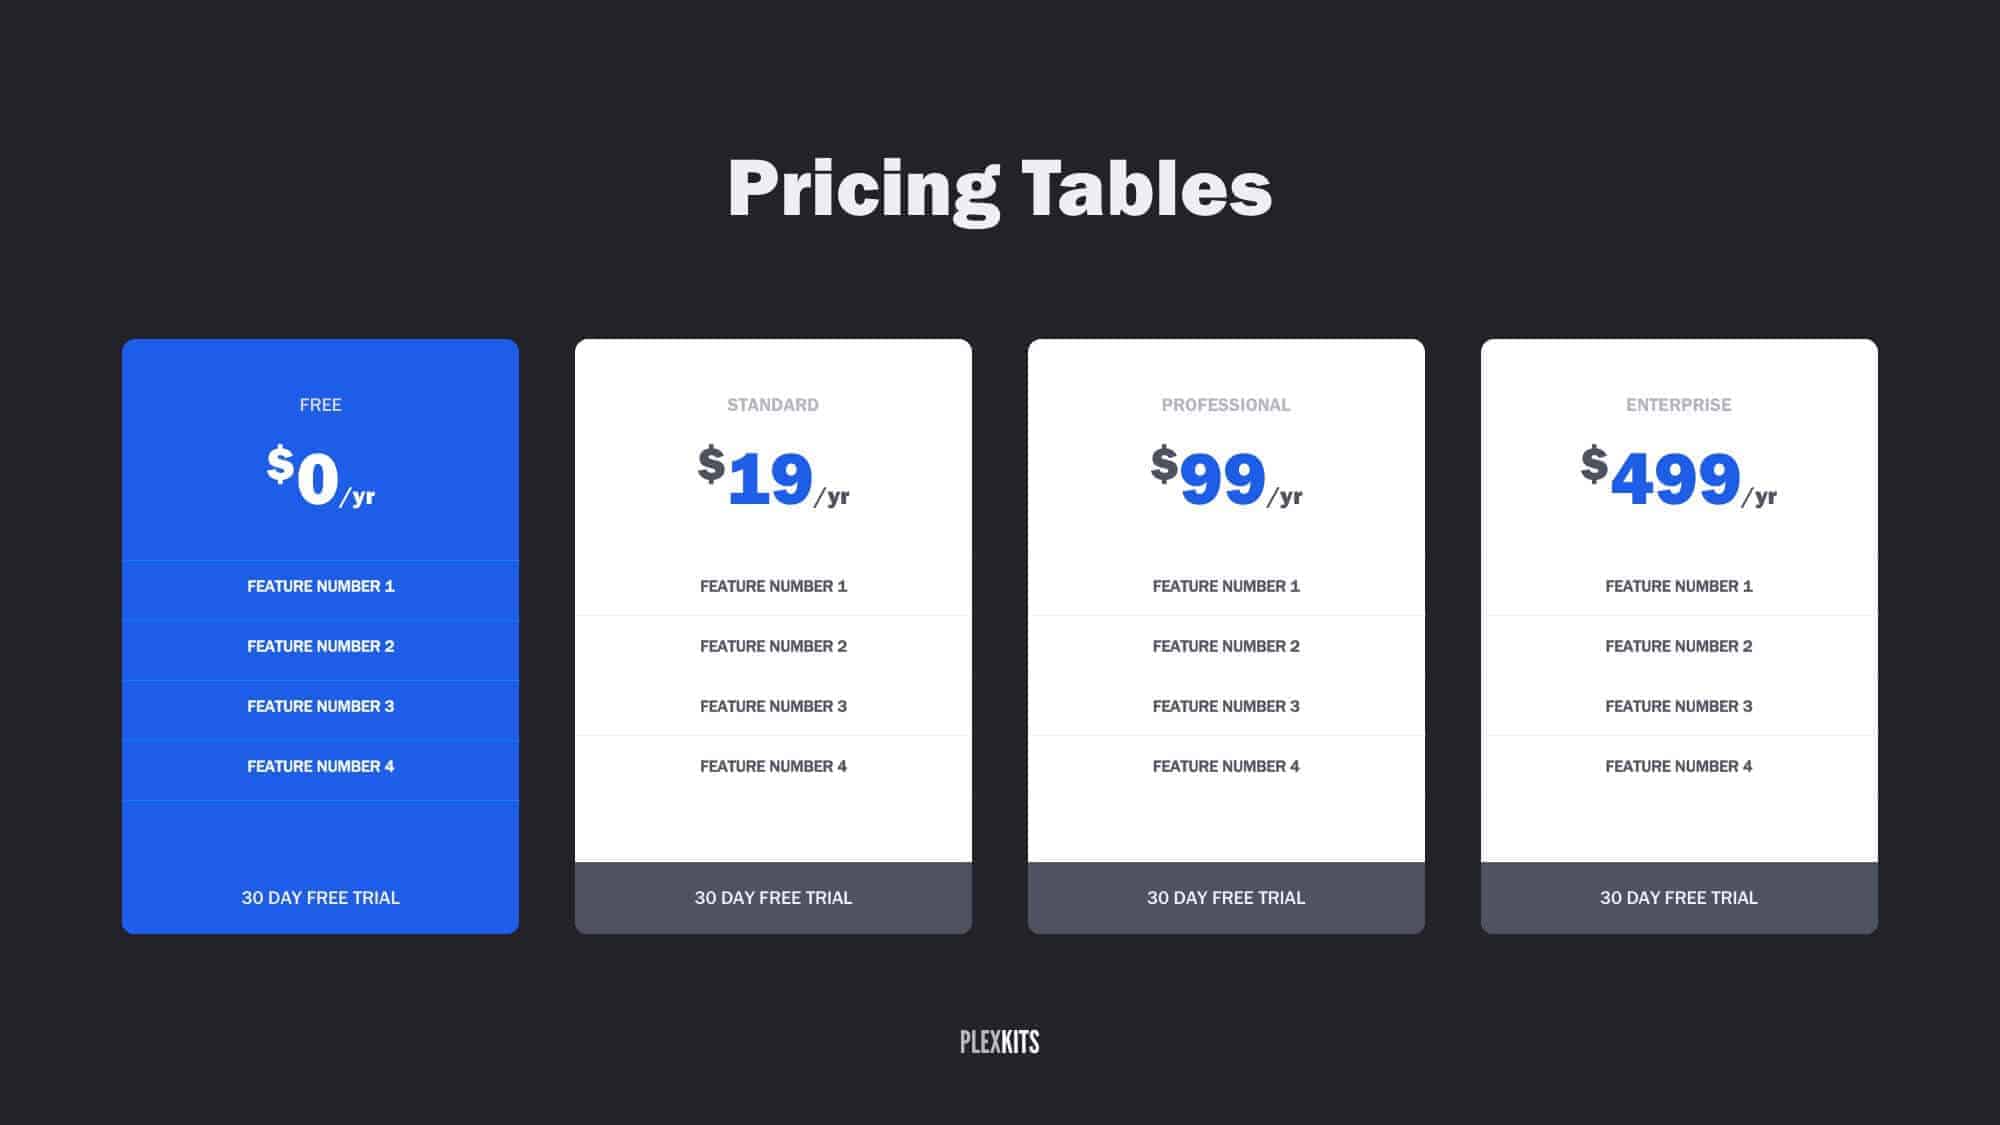 Pricing Strategy. Price POWERPOINT. POWERPOINT 2017.